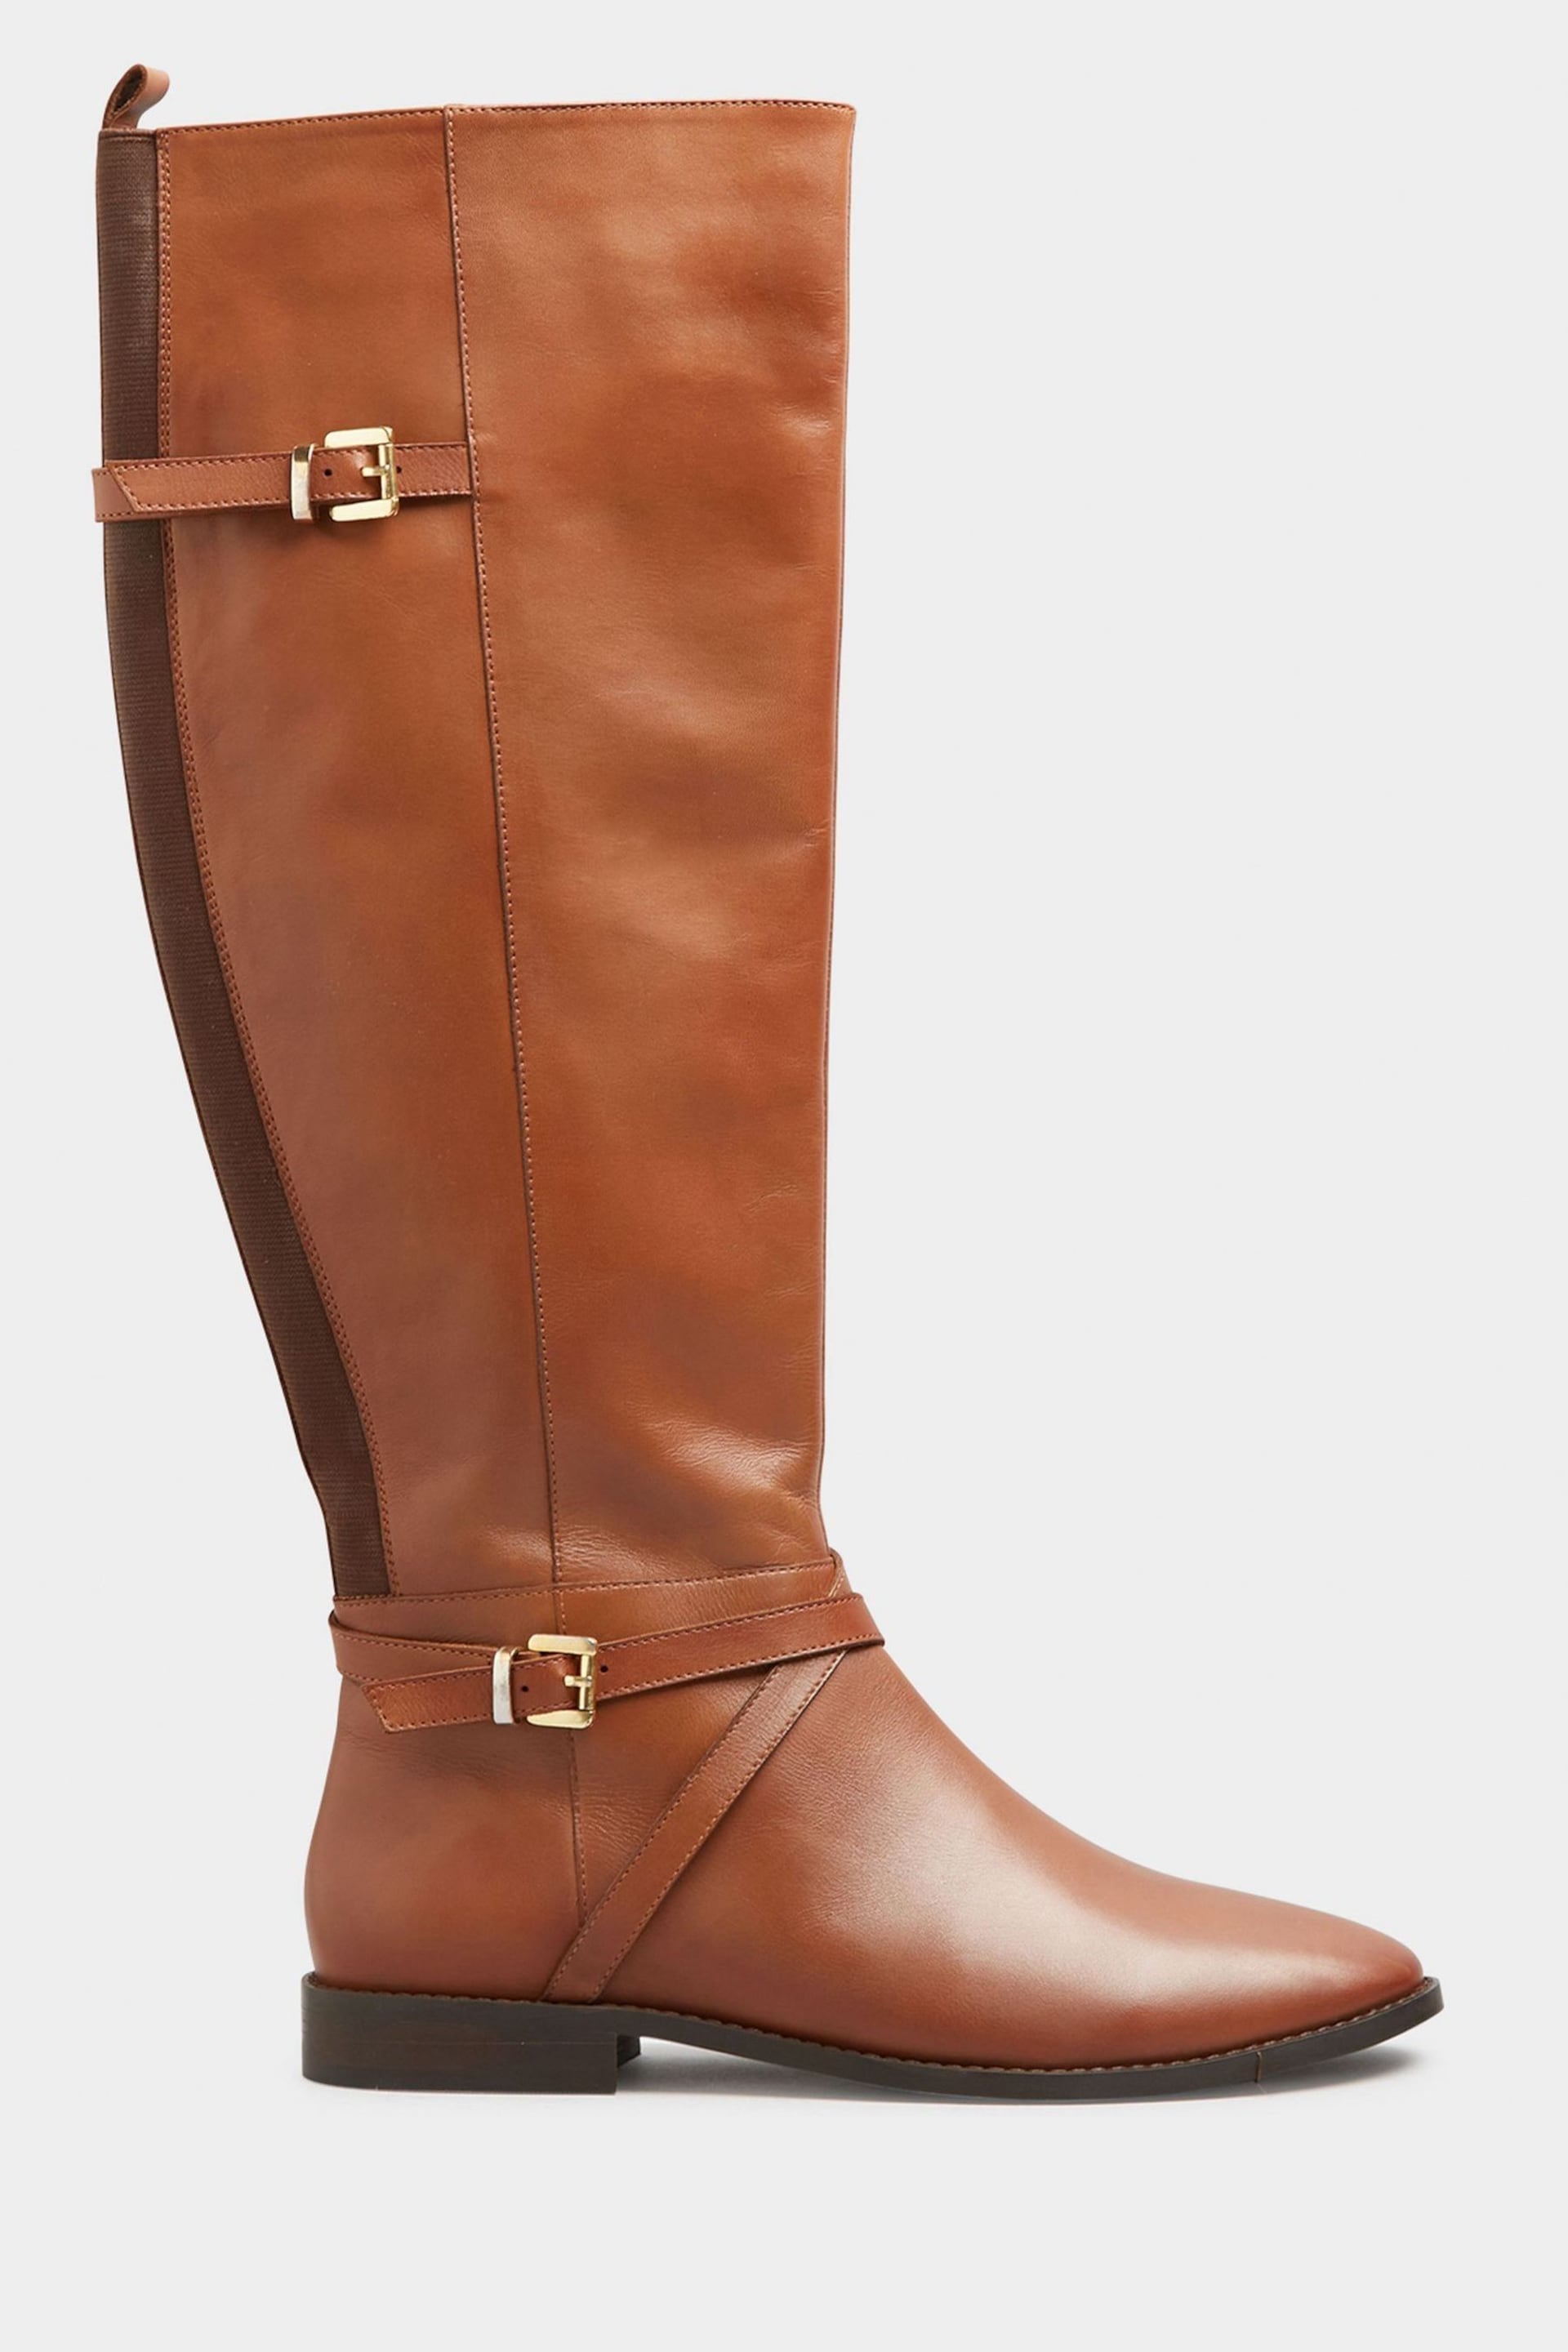 Long Tall Sally Brown Leather Riding Boots - Image 2 of 5